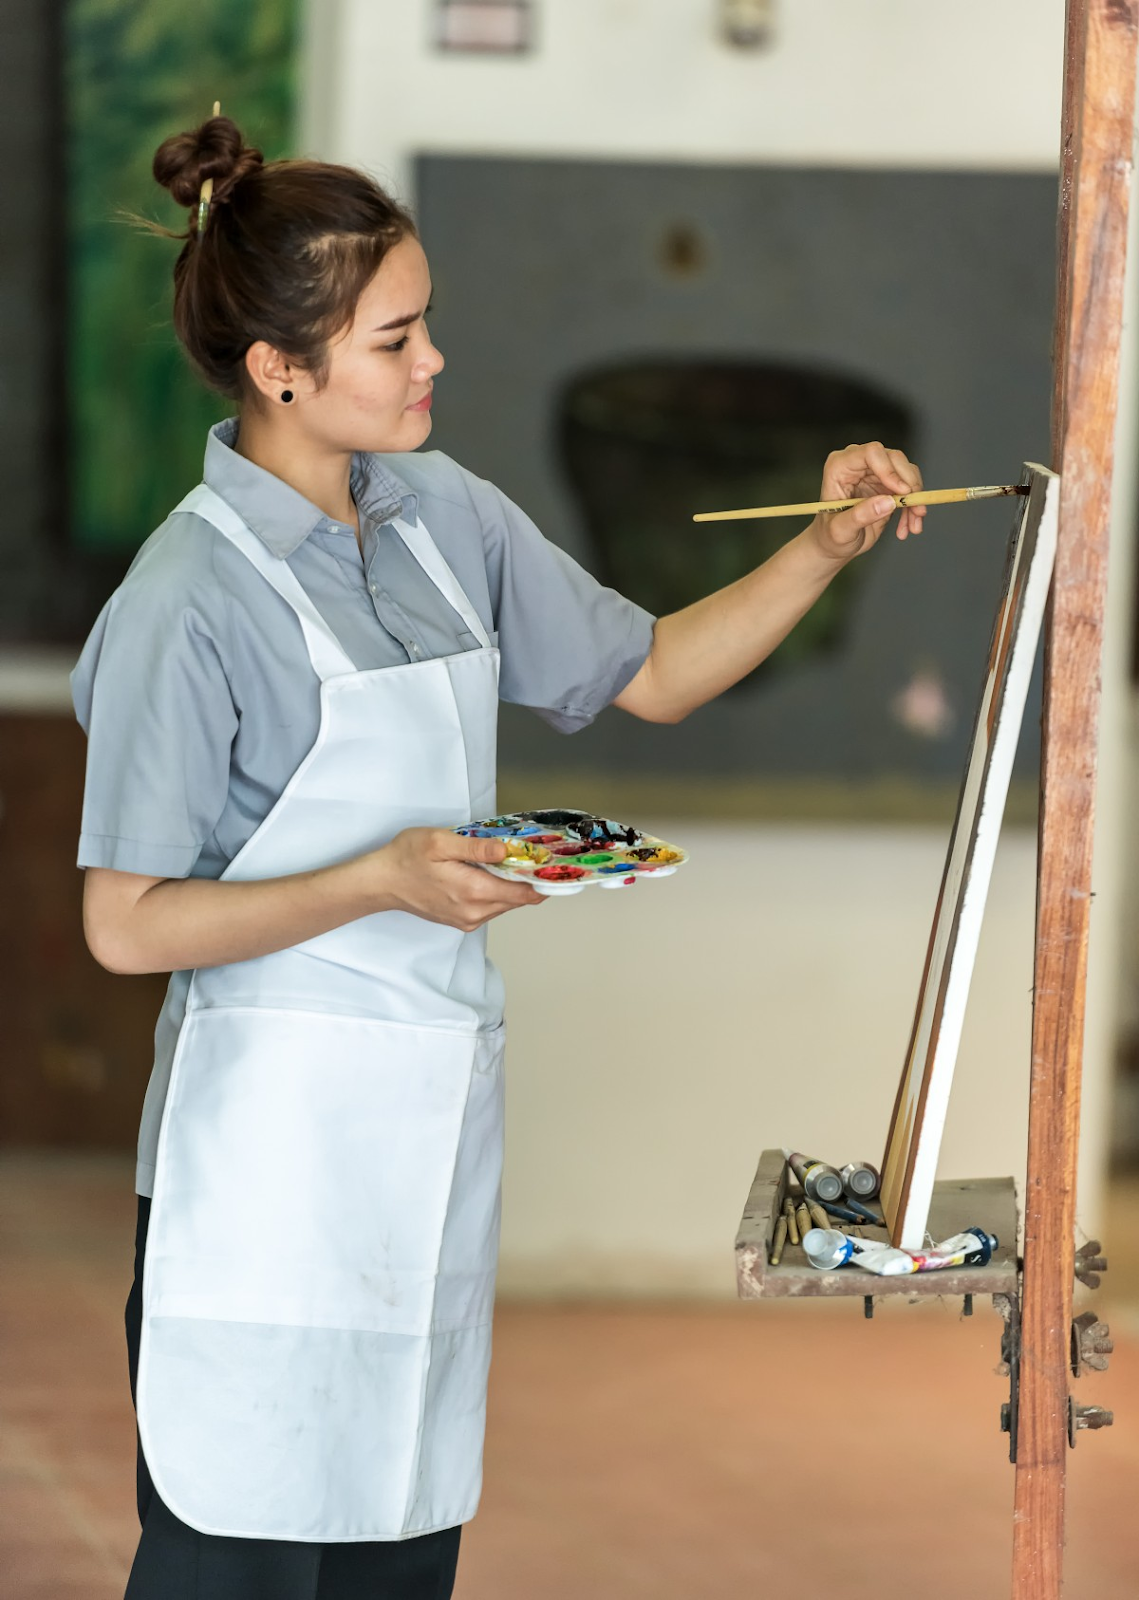 woman painitng on standing canvas thinking tomorrow will be better